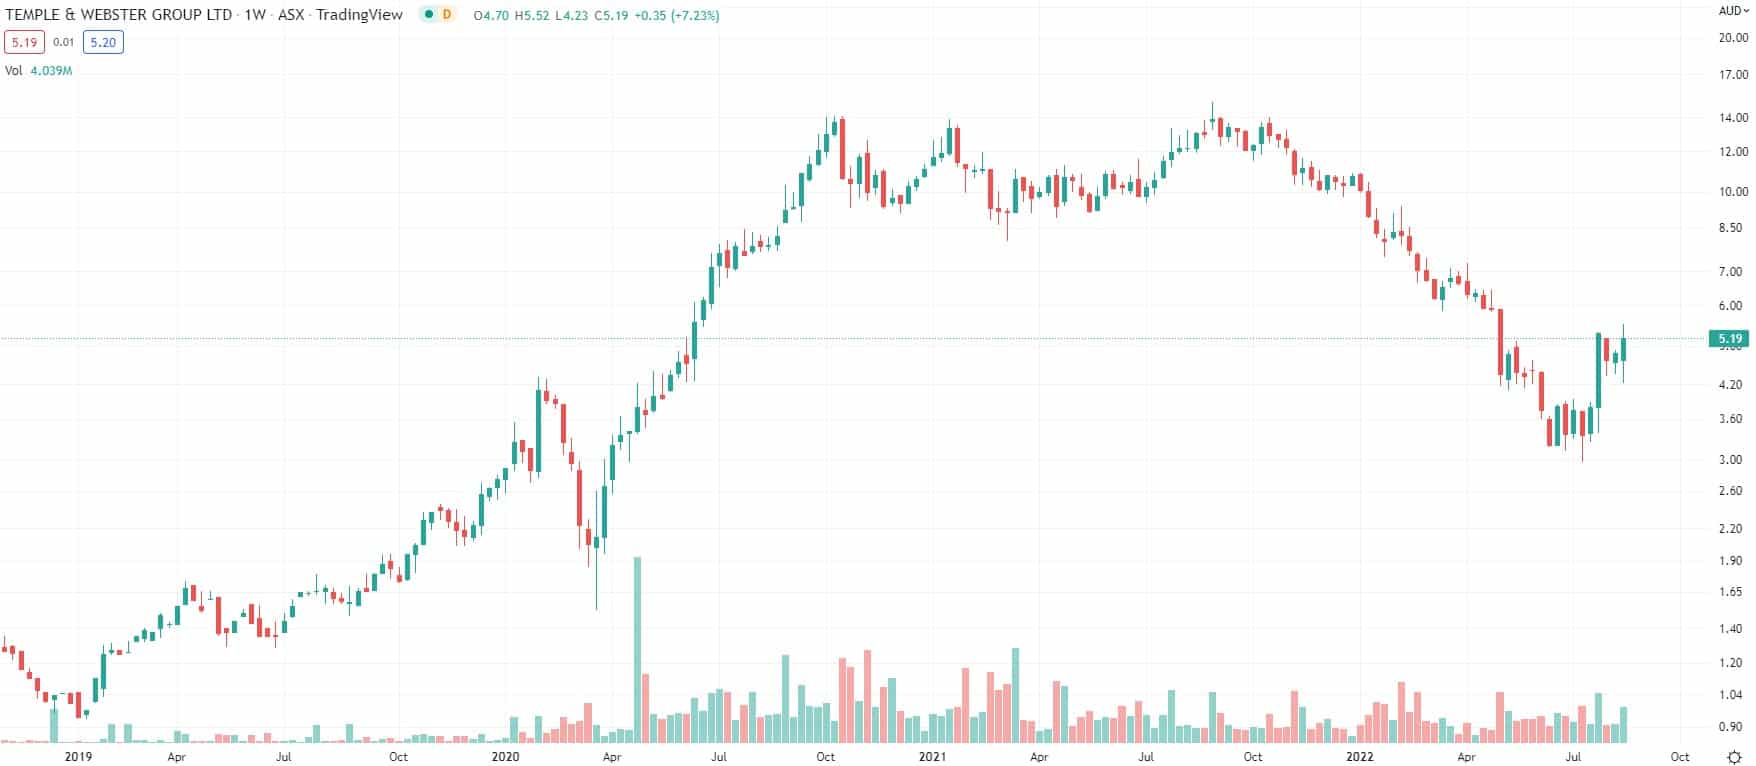 Temple & Webster (ASX: TPW) continues its rebound after its FY22 results 1